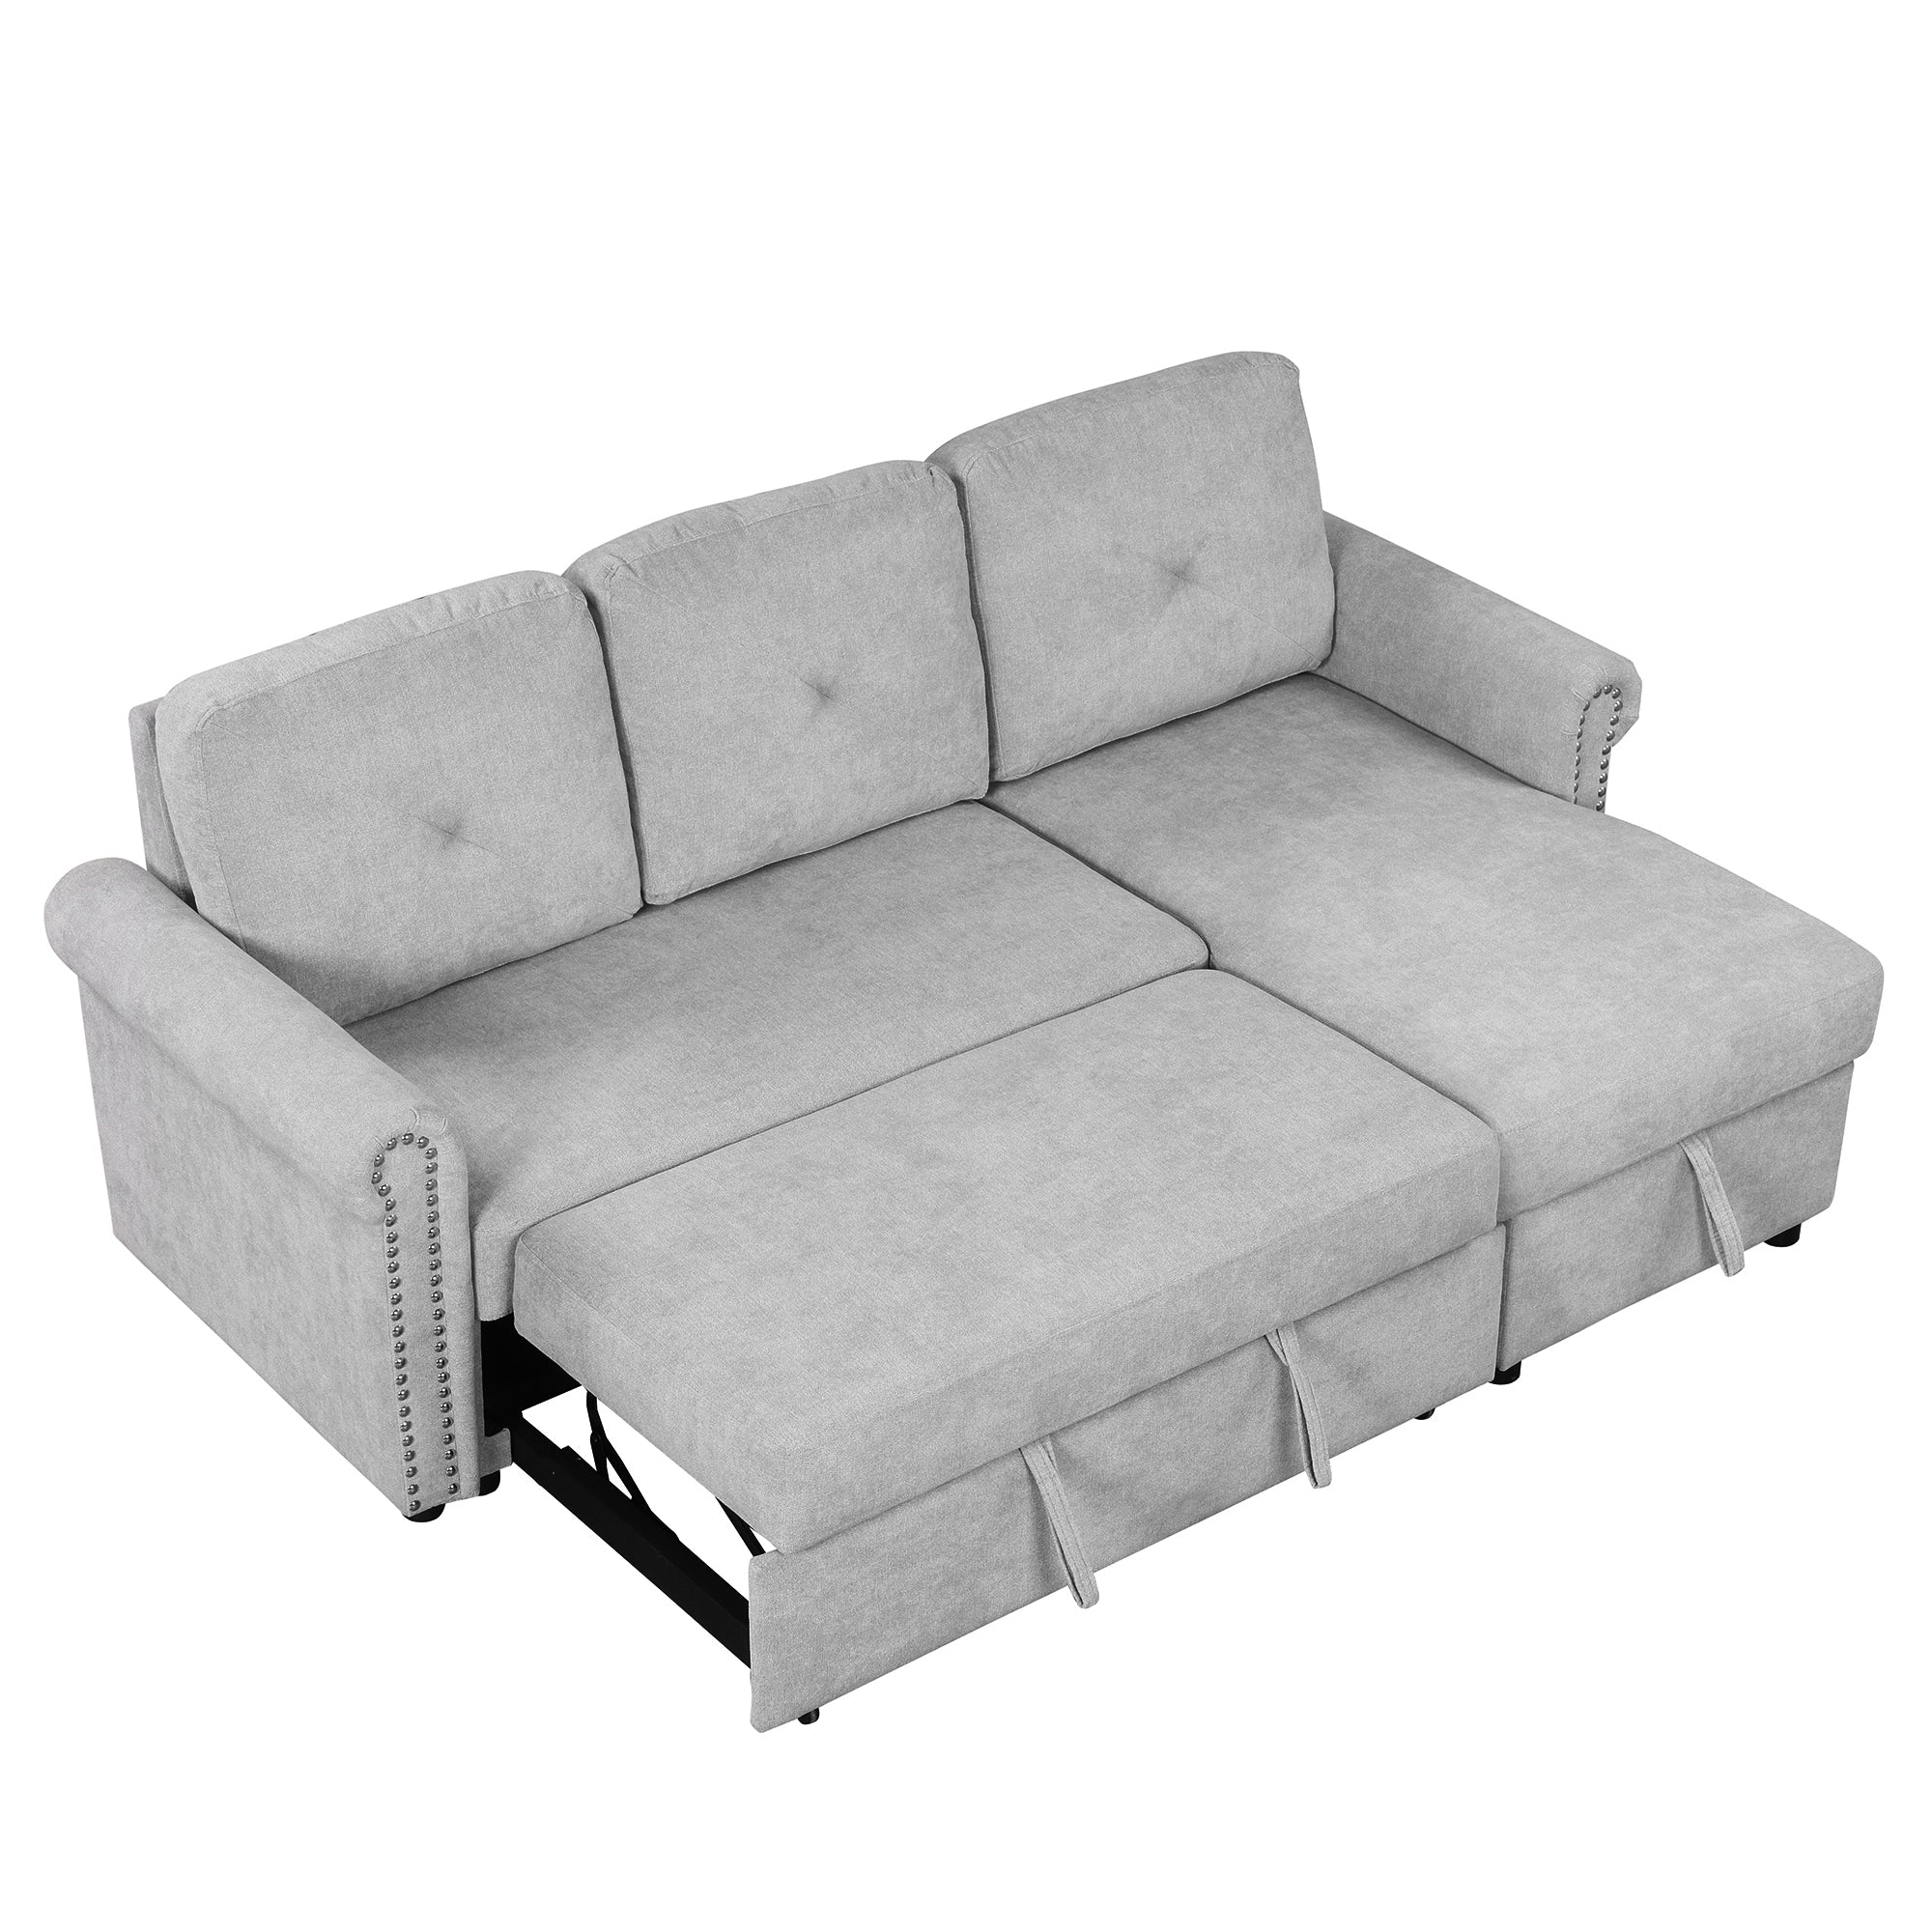 Gray Velvet Convertible Sleeper Sectional with Storage Chaise-Sleeper Sofas-American Furniture Outlet